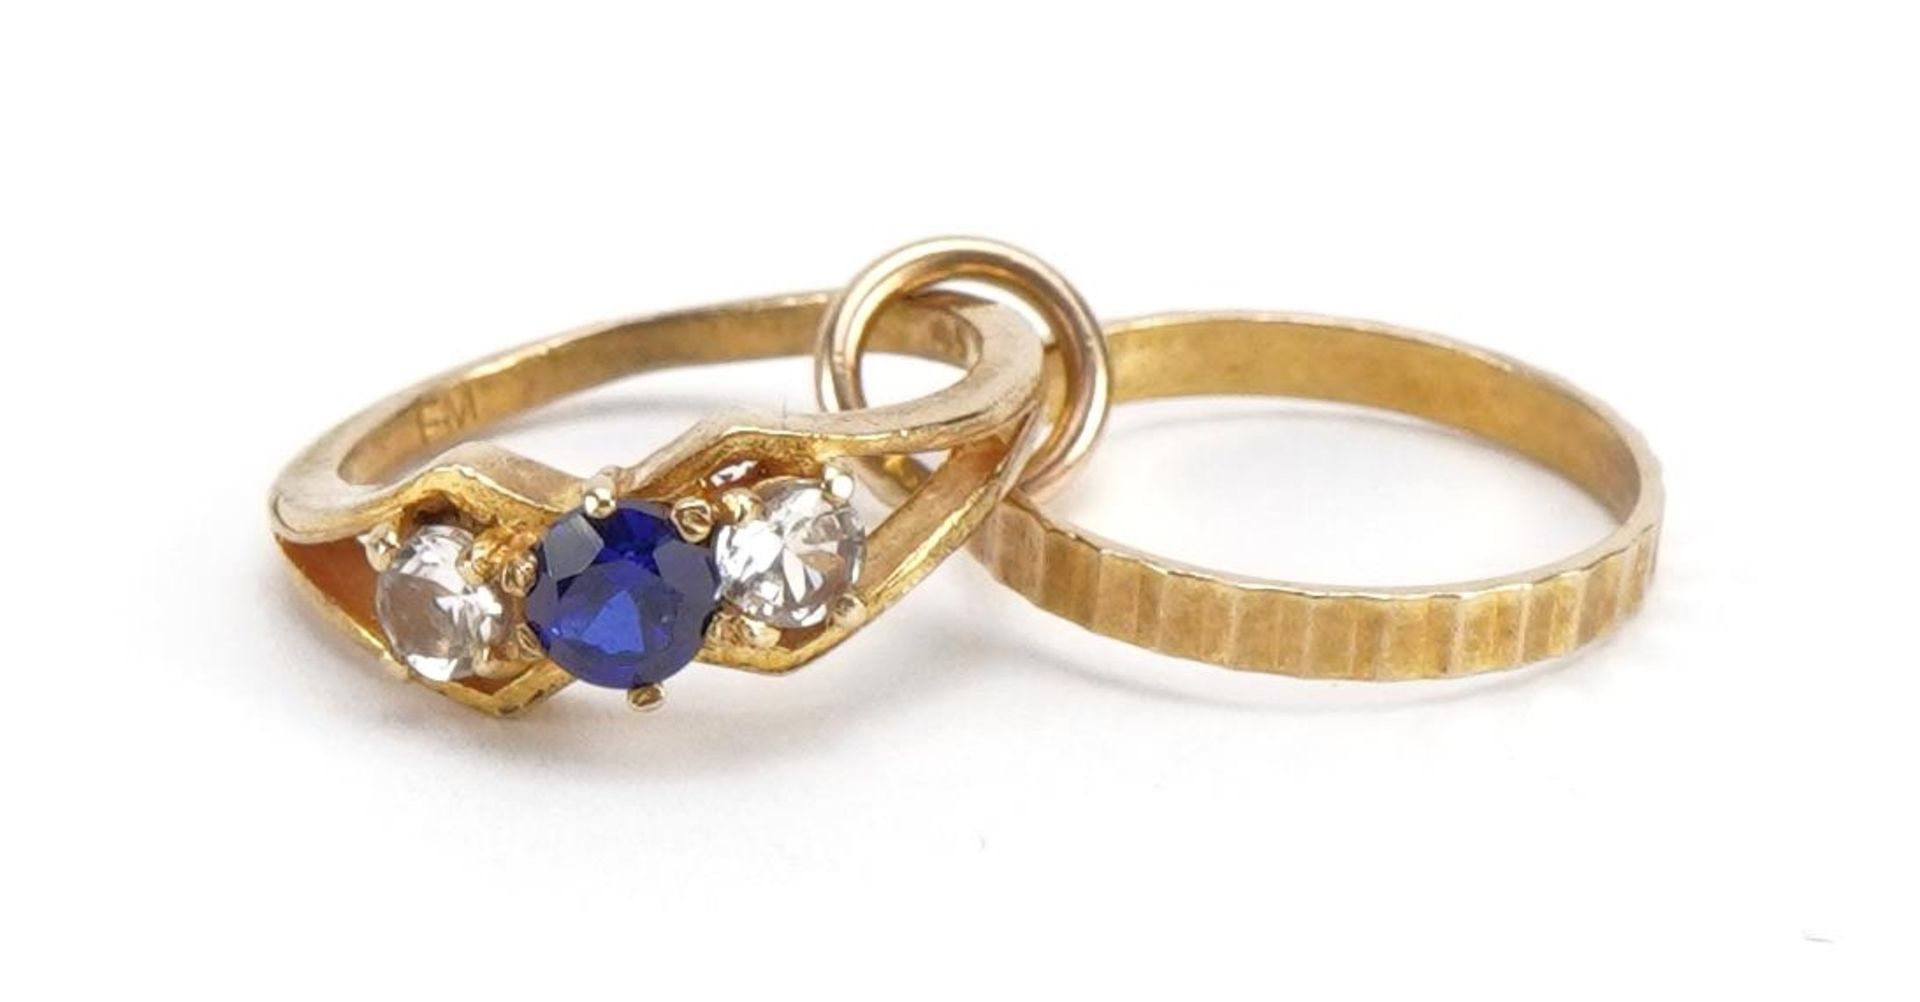 9ct gold engagement and wedding band charm set with sapphire and clear stones, 1.7cm high, 2.0g - Image 2 of 3